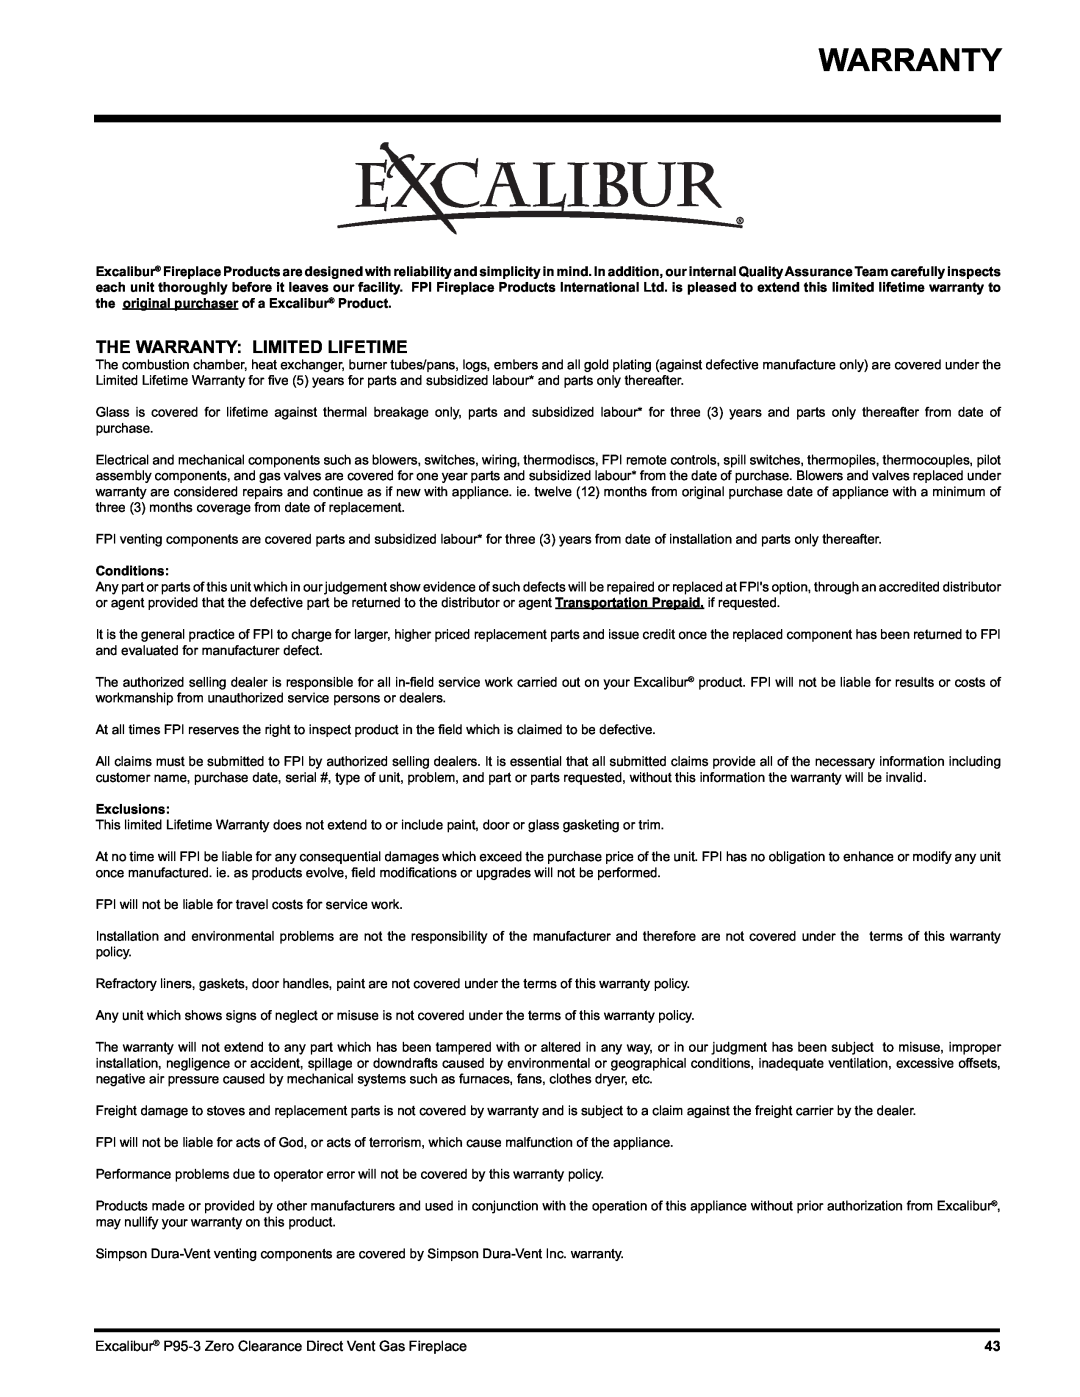 Excalibur electronic P95-LP3, P95-NG3 installation manual The Warranty Limited Lifetime, Conditions, Exclusions 